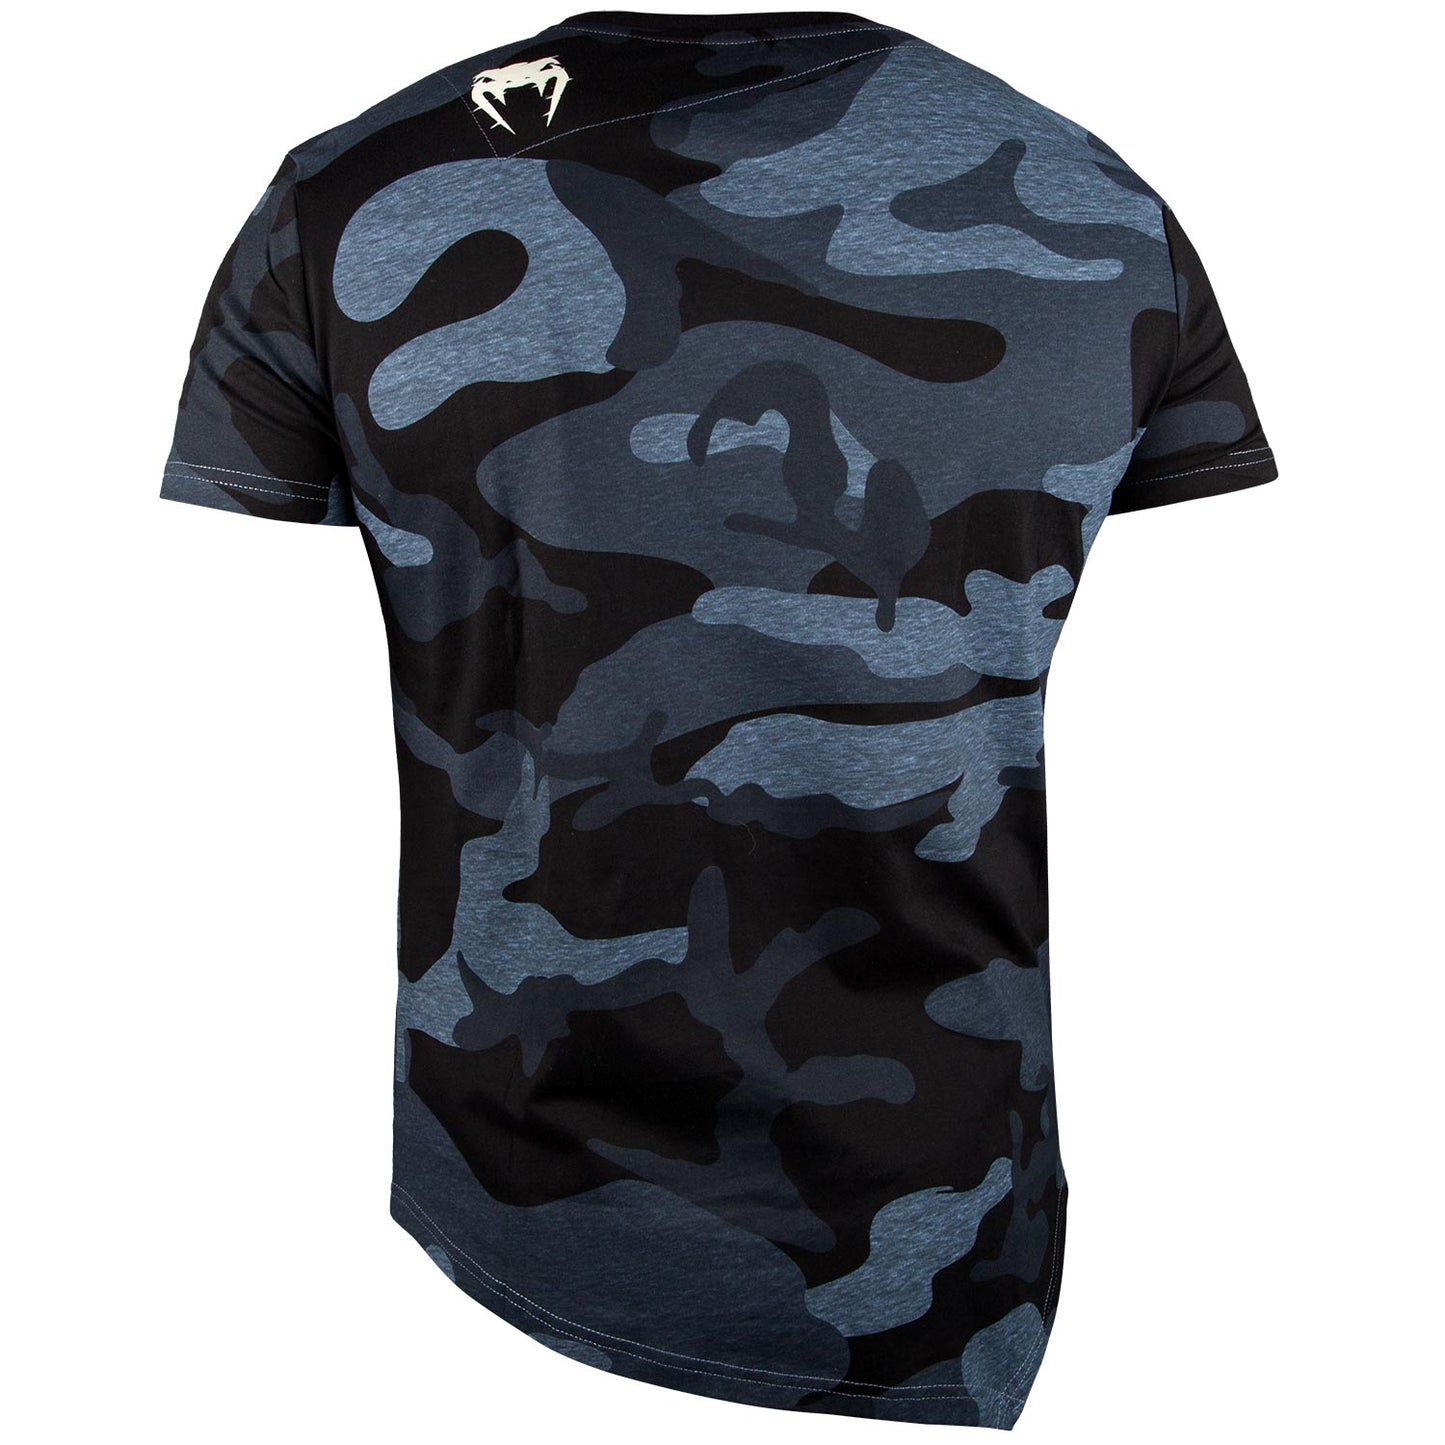 Venum Interference 2.0 T-Shirt - Dunkles Camo